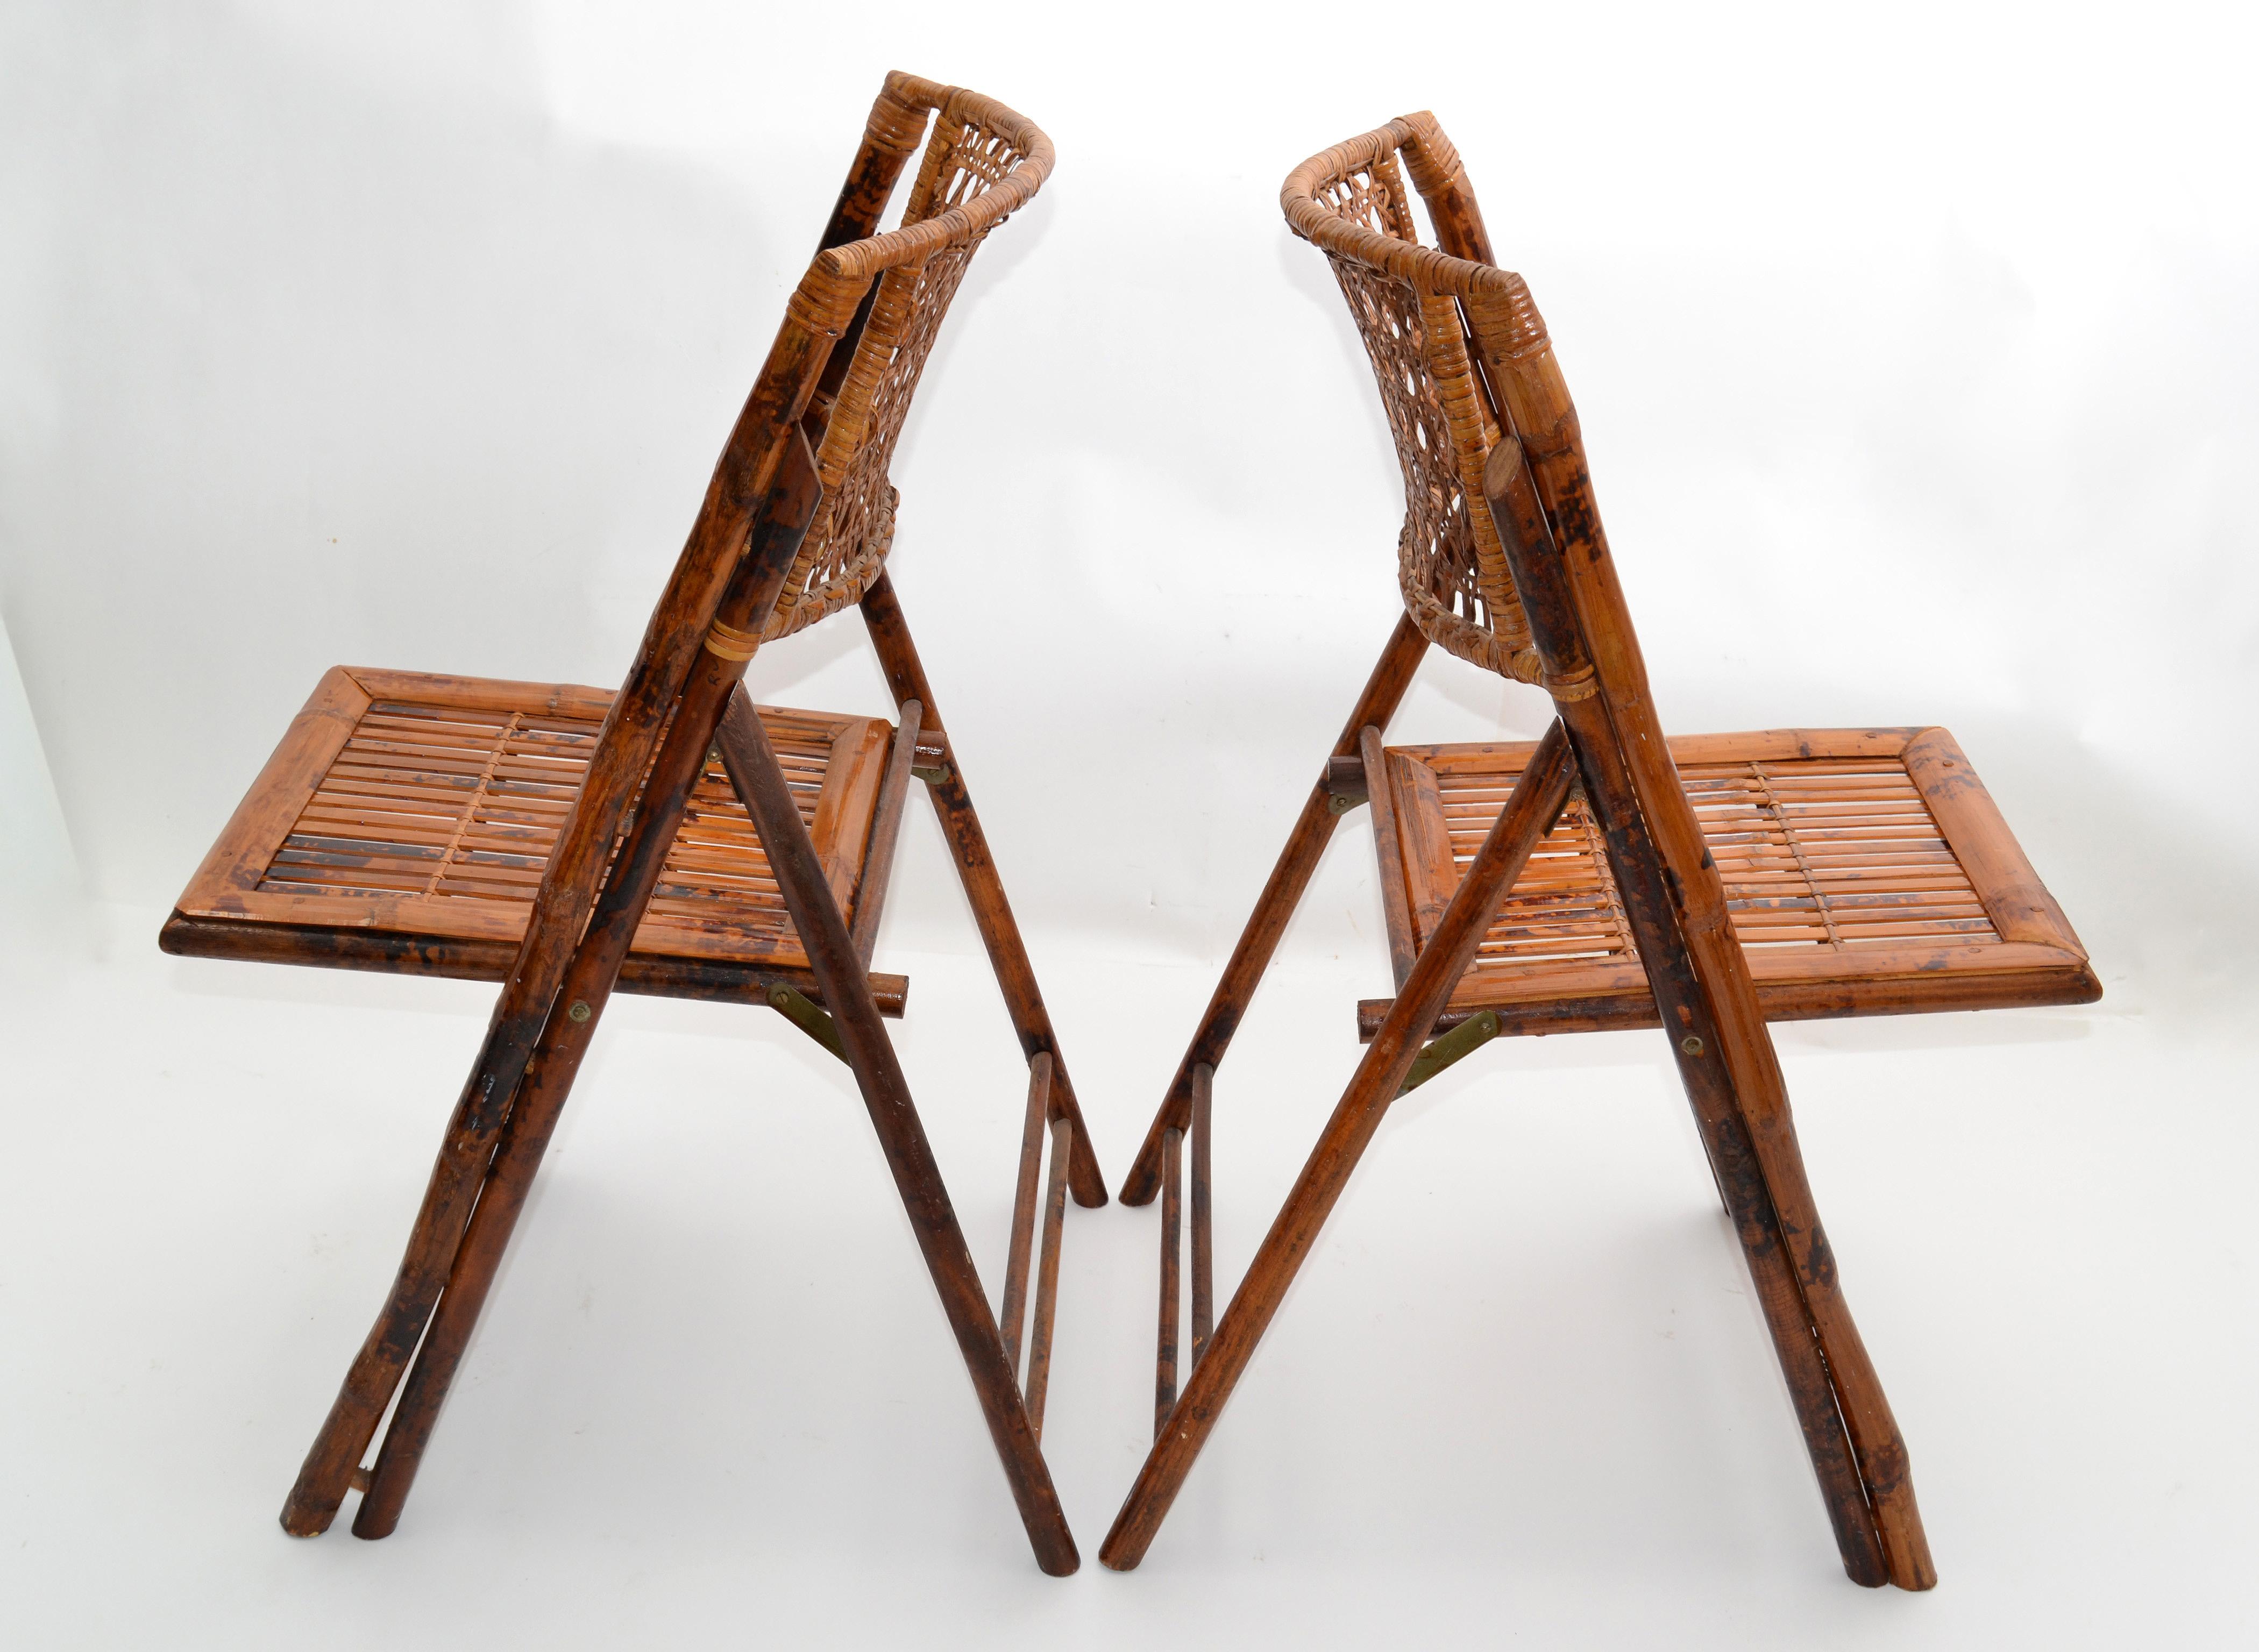 Bohemian Boho Chic Mid-Century Modern Handcrafted Bamboo & Cane Folding Bistro Chairs, 4